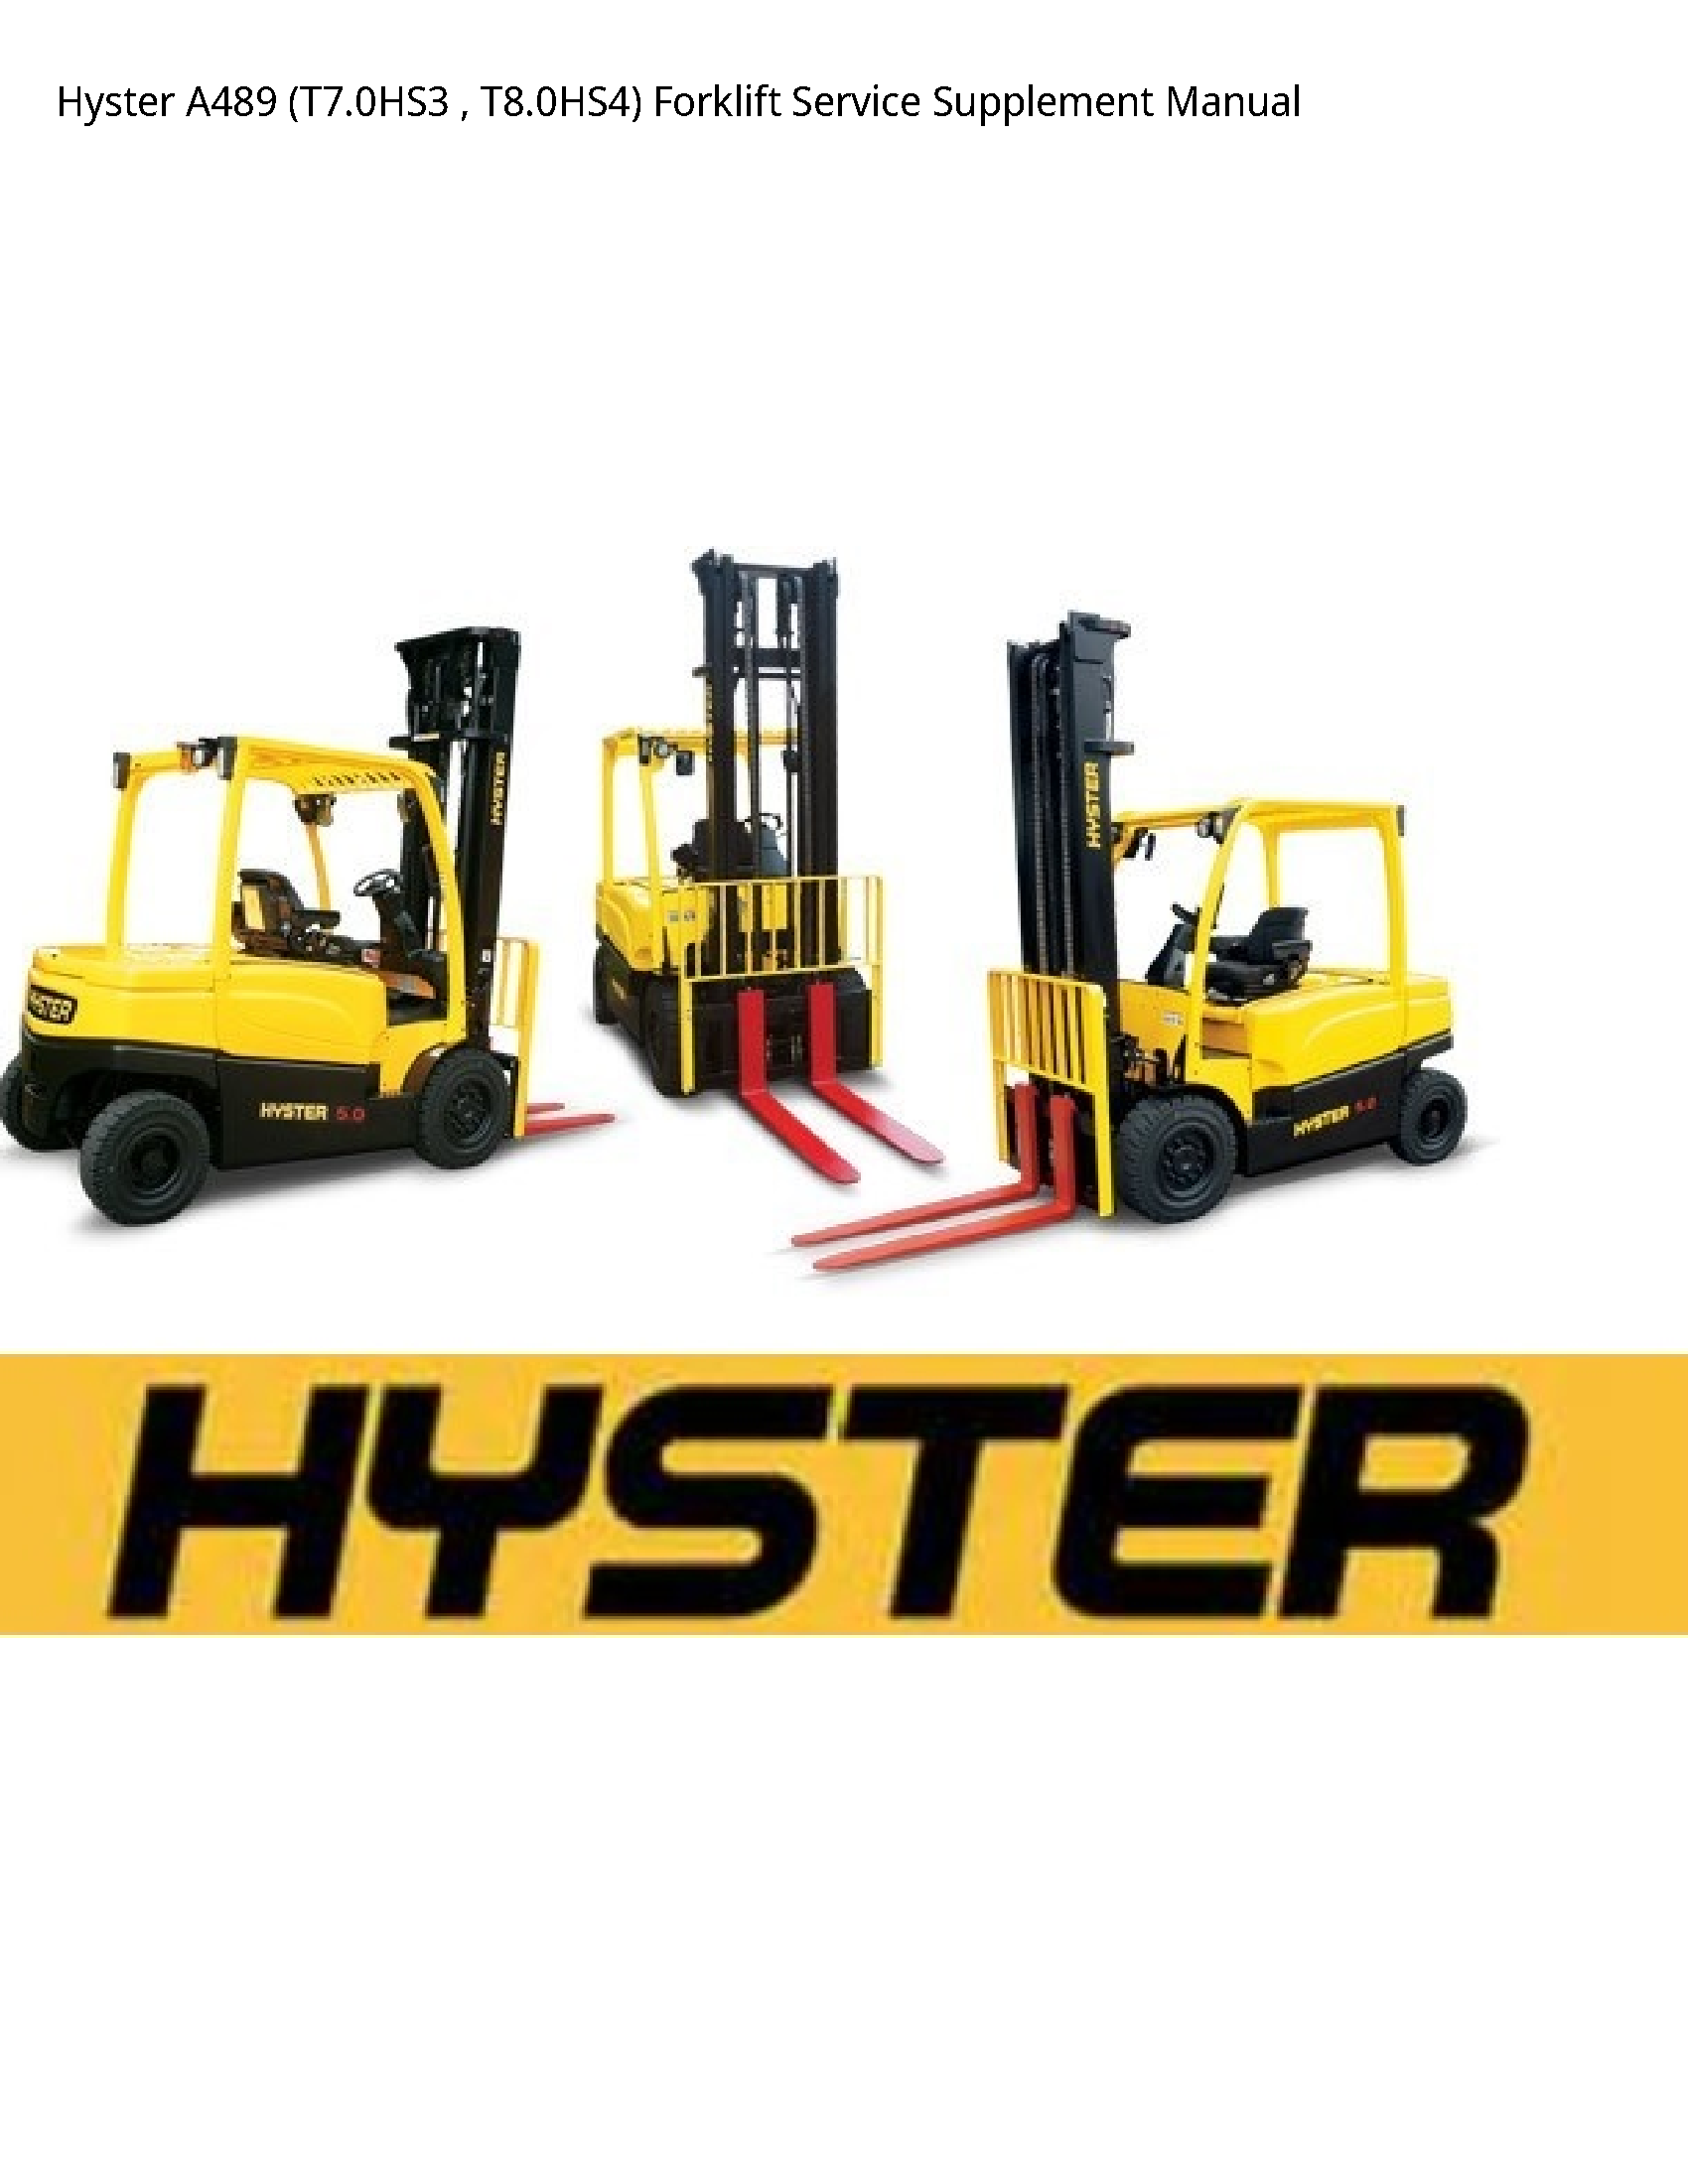 Hyster A489 Forklift Service Supplement manual